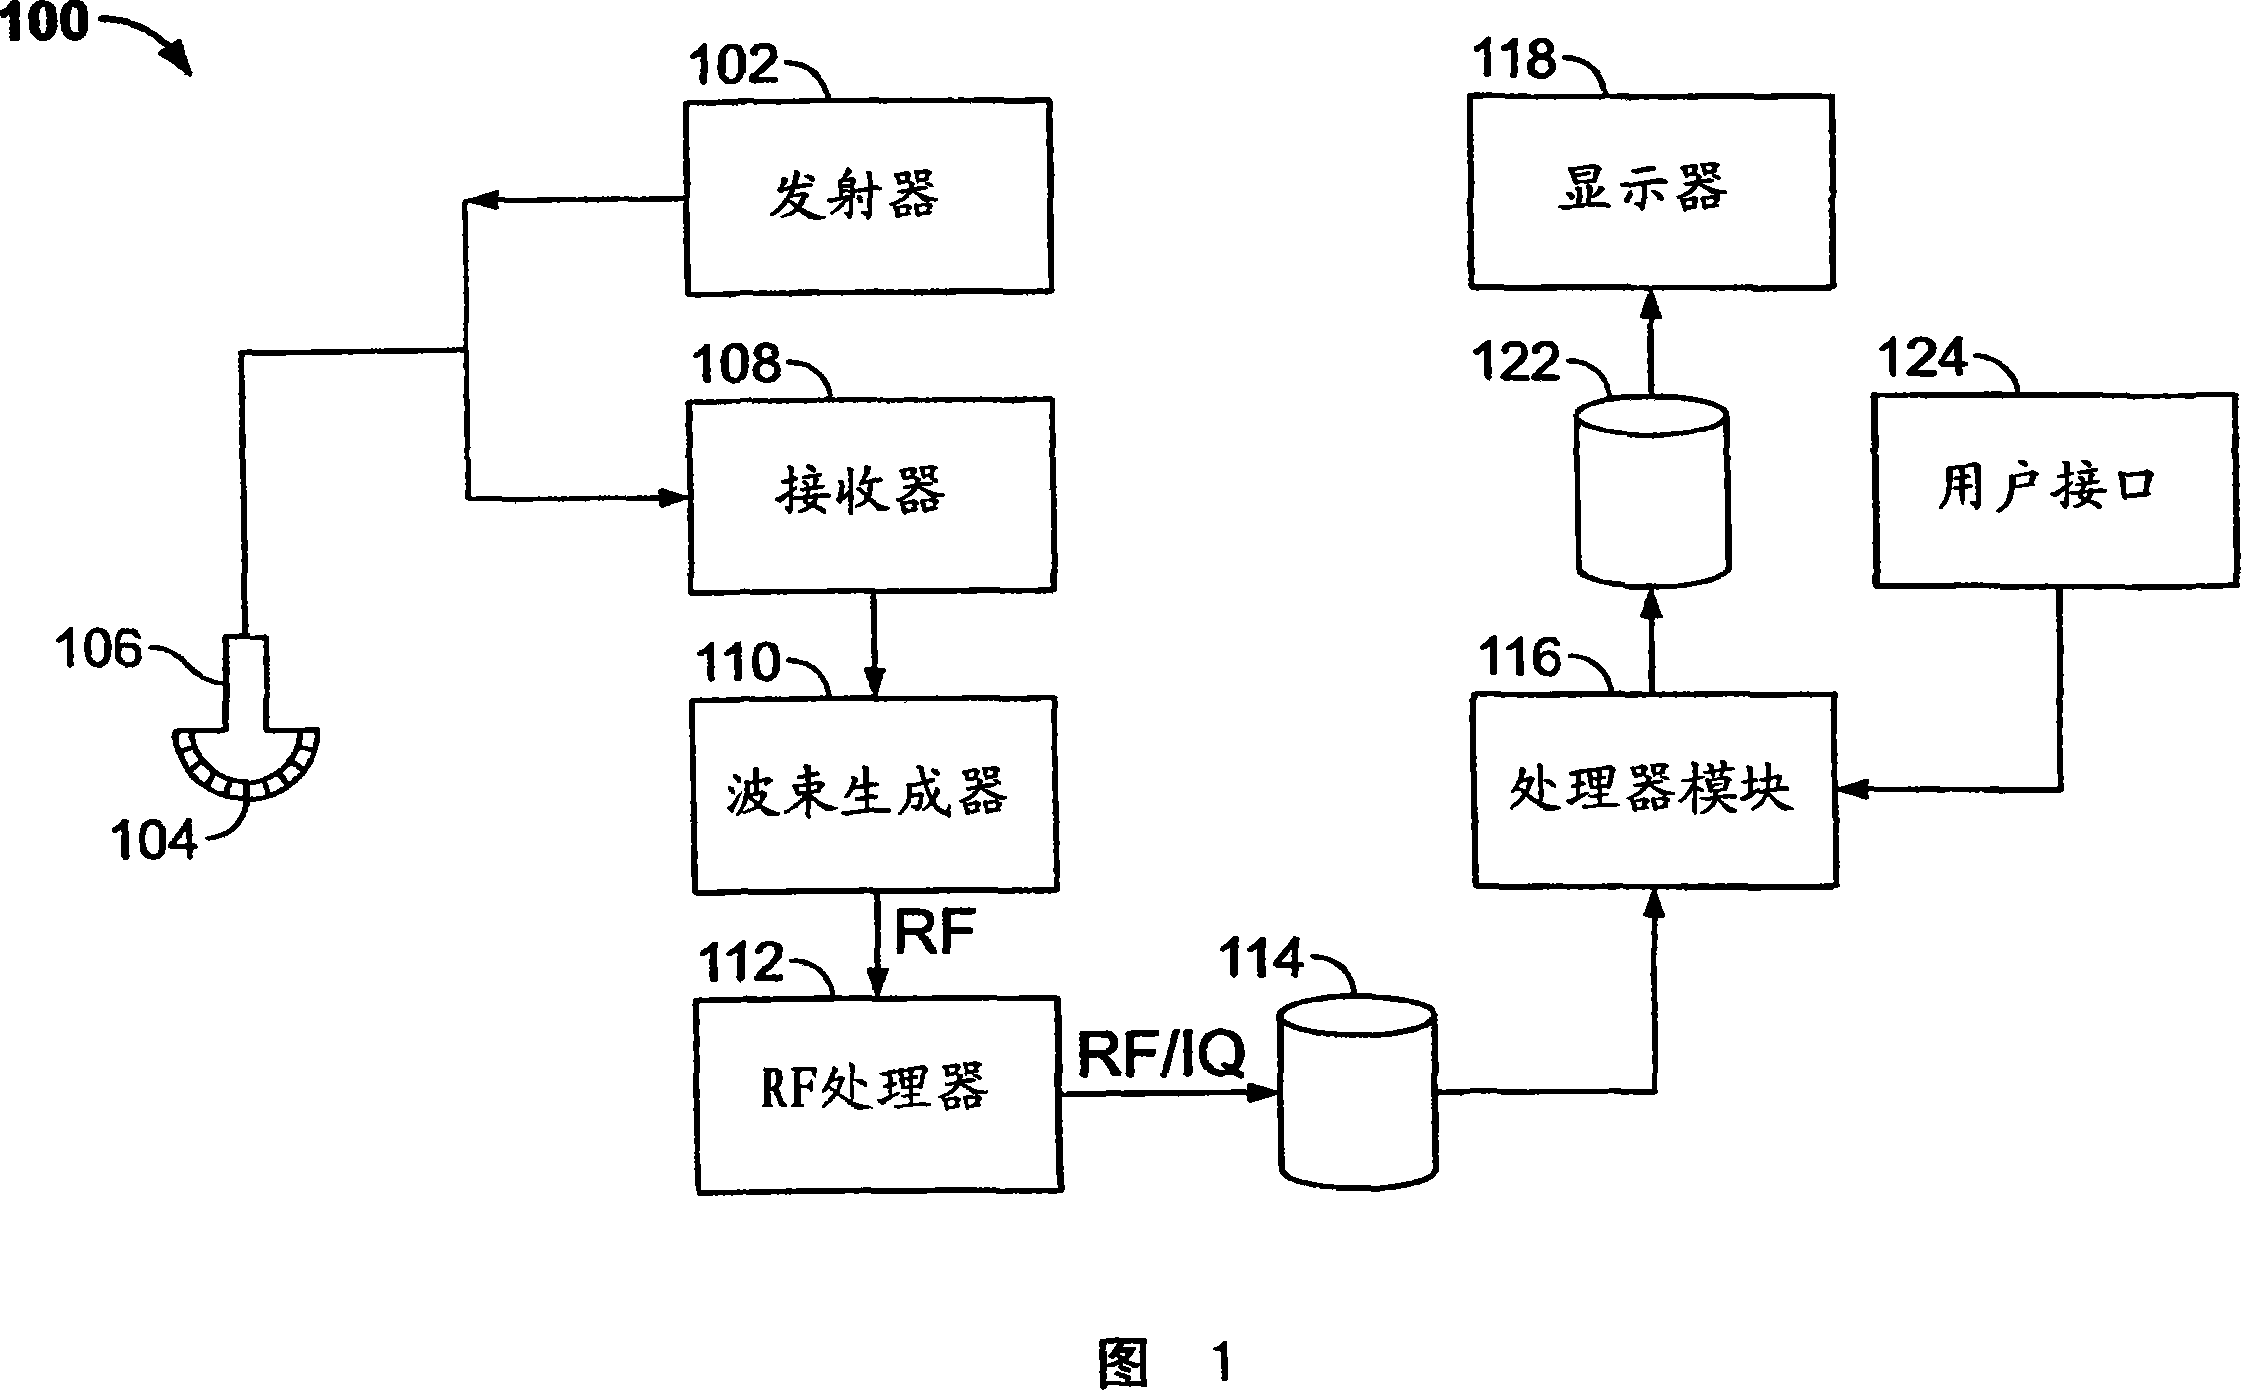 User interface for automatic multi-plane imaging ultrasound system